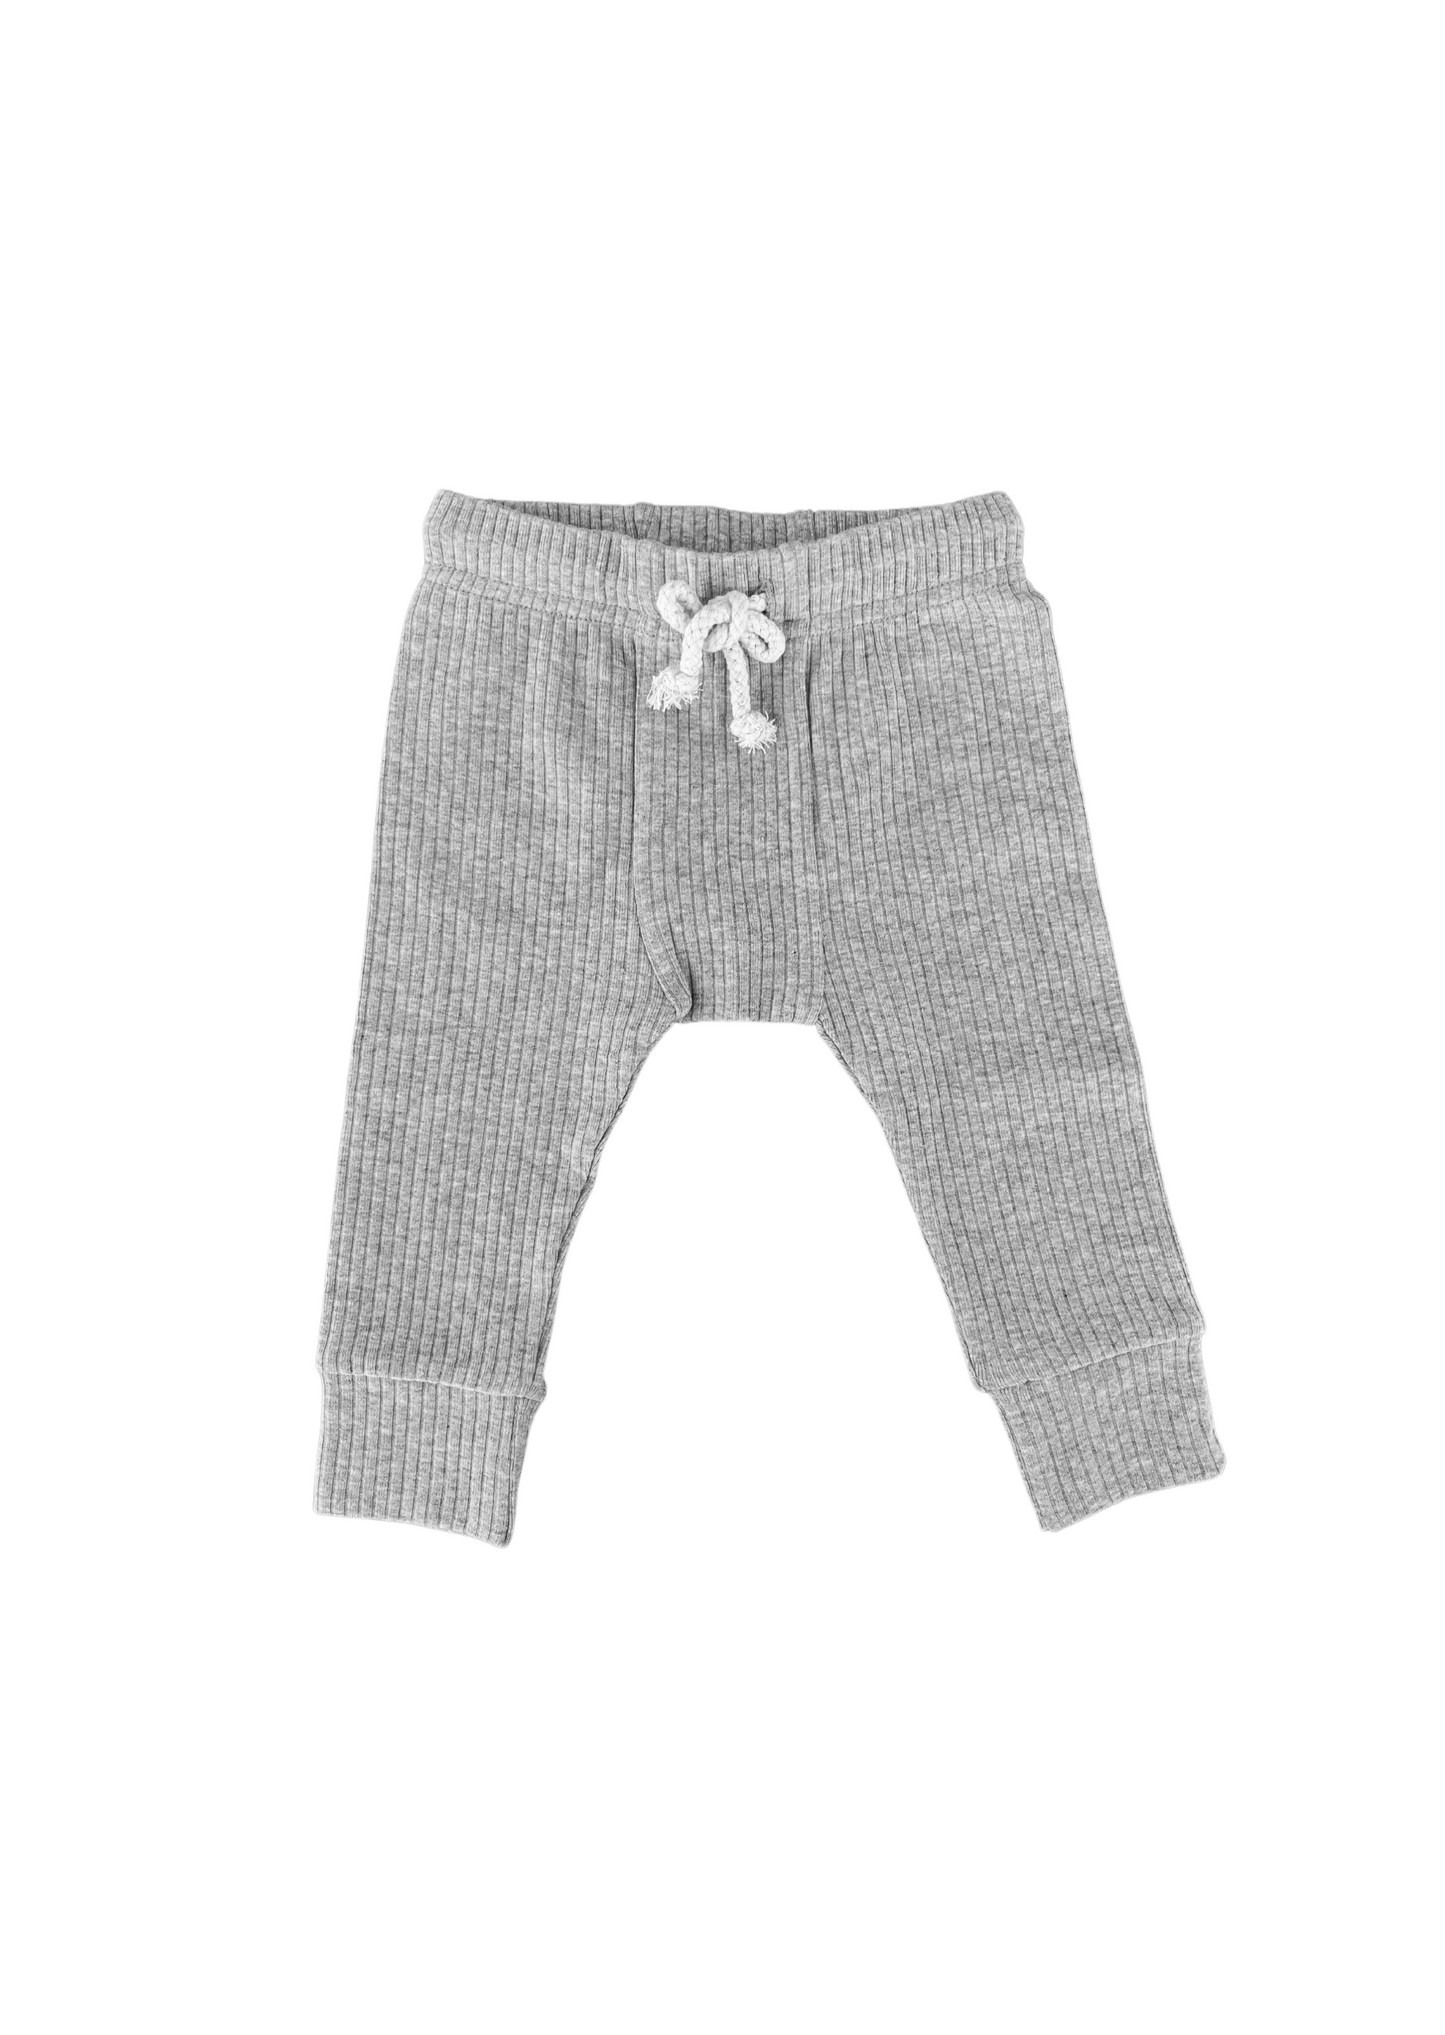 RIBBED LOUNGE PANT IN HEATHERED GRAY – SOVA